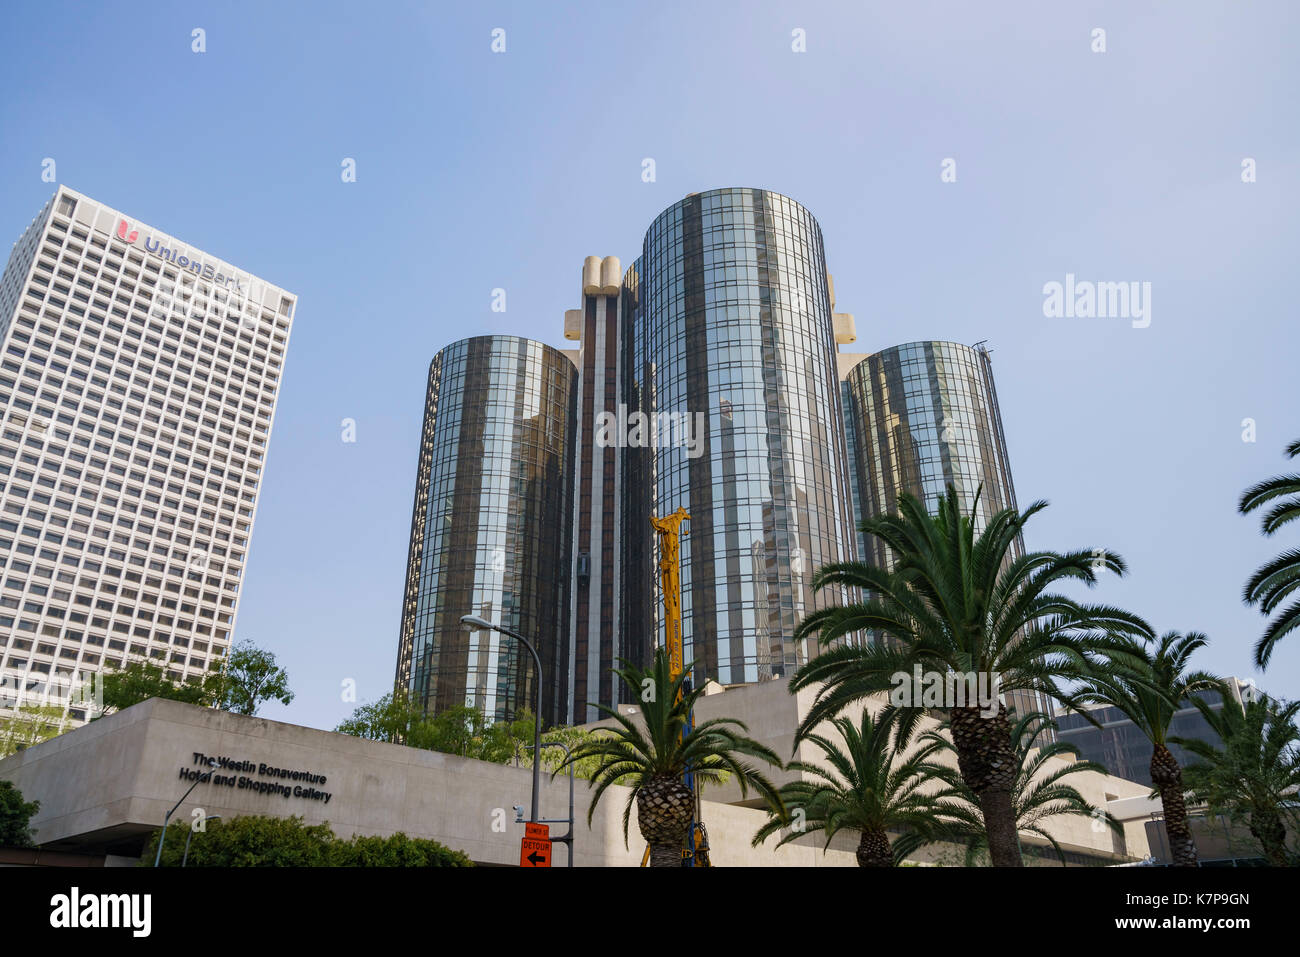 Los Angeles , JUN 4: Downtown street view on the road on JUN 4, 2017 at Los Angeles, California Stock Photo